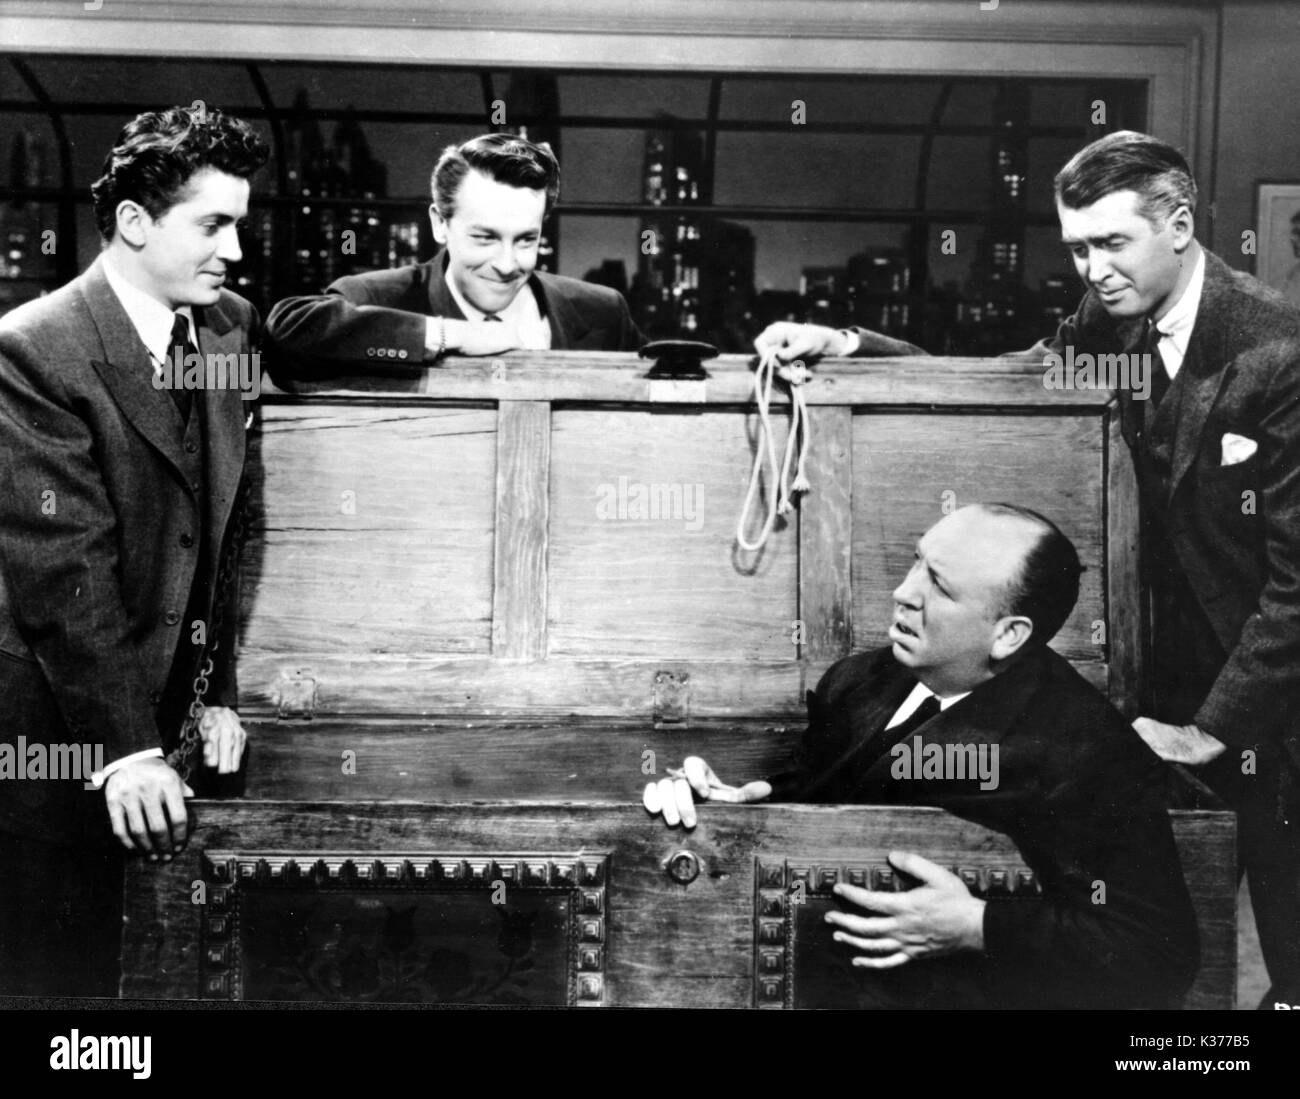 ROPE L-R, FARLEY GRANGER, JOHN DALL, JAMES STEWART & ALFRED HITCHCOCK IN TRUNK Stock Photo